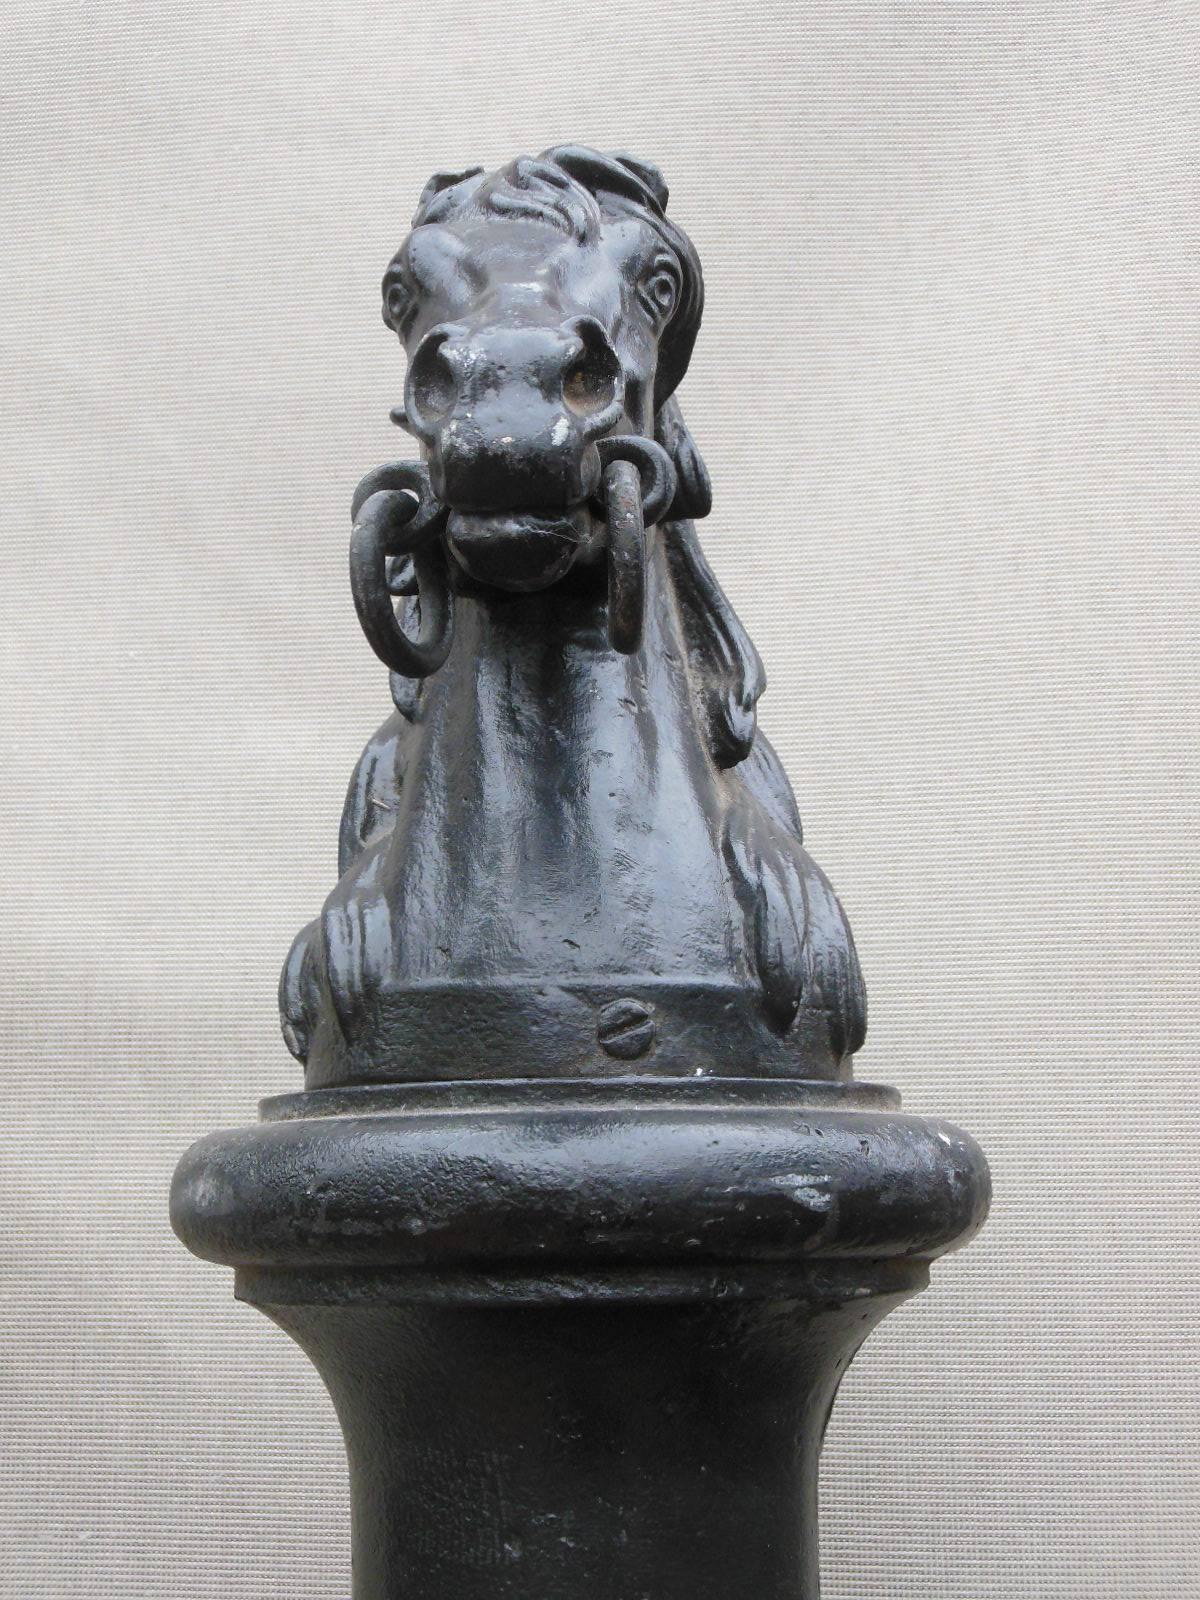 antique horse head hitching post